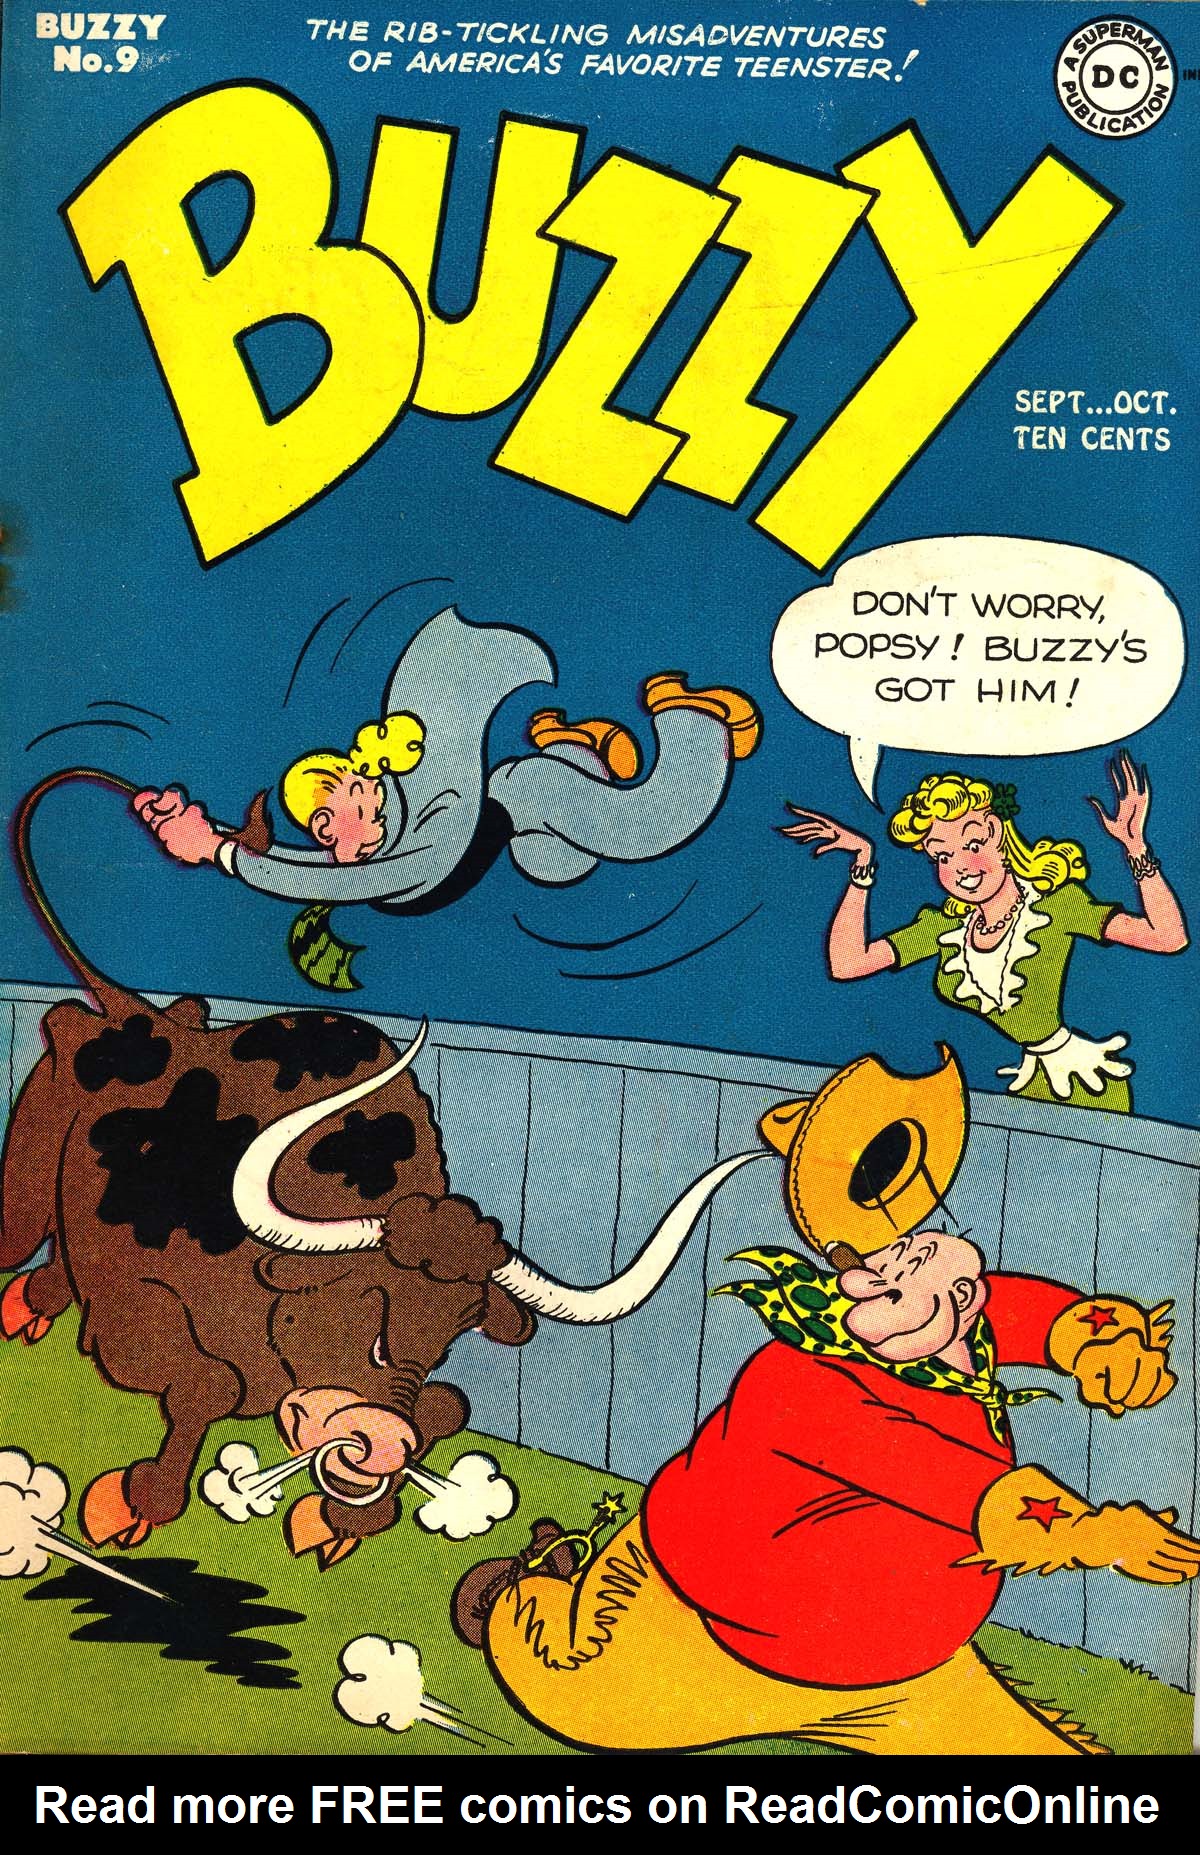 Read online Buzzy comic -  Issue #9 - 1